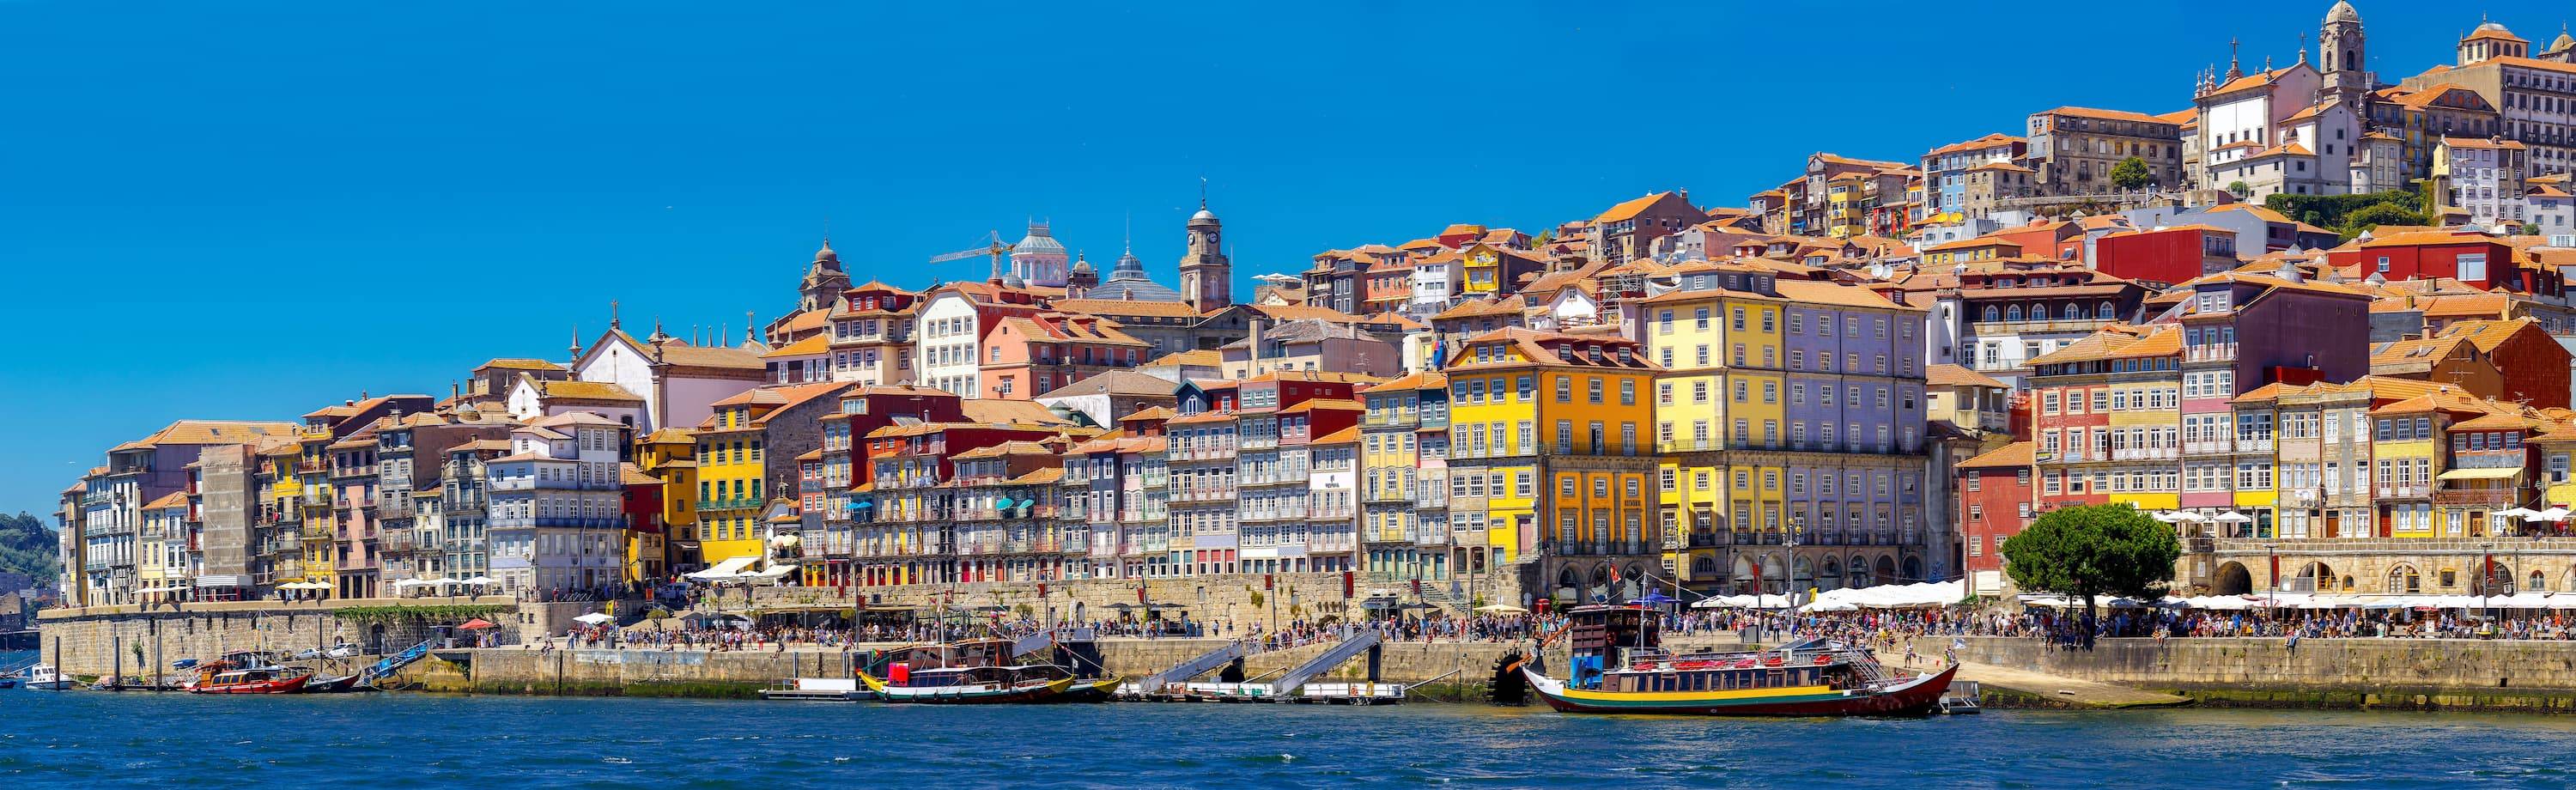 Tour of the Douro riverbanks in Porto with boat ride and winery visit